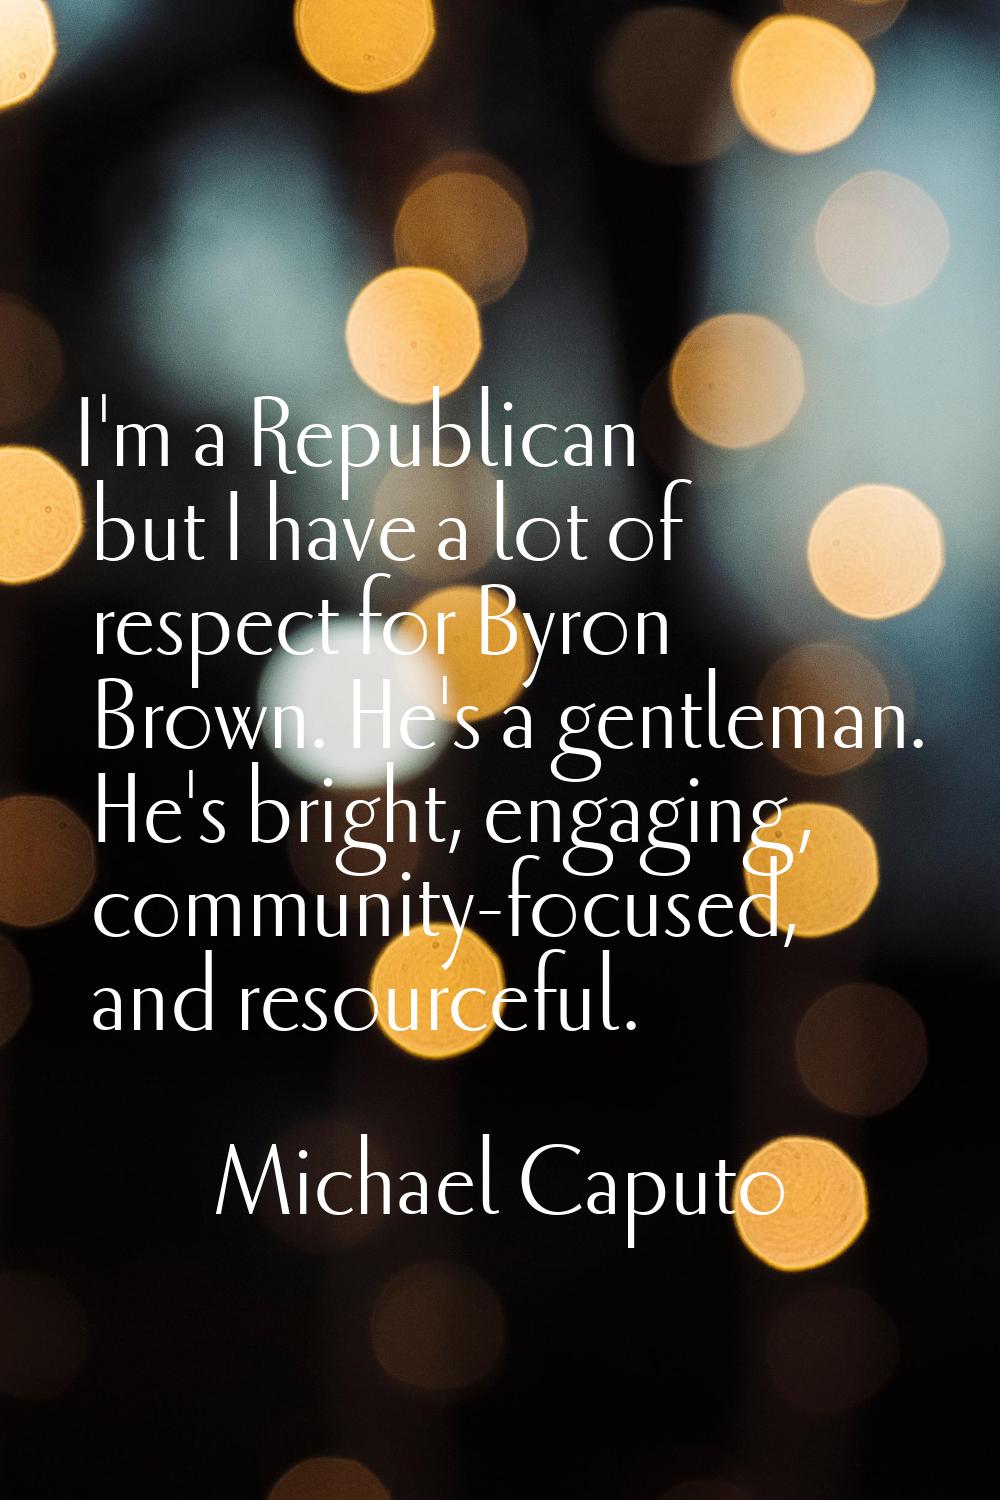 I'm a Republican but I have a lot of respect for Byron Brown. He's a gentleman. He's bright, engagi